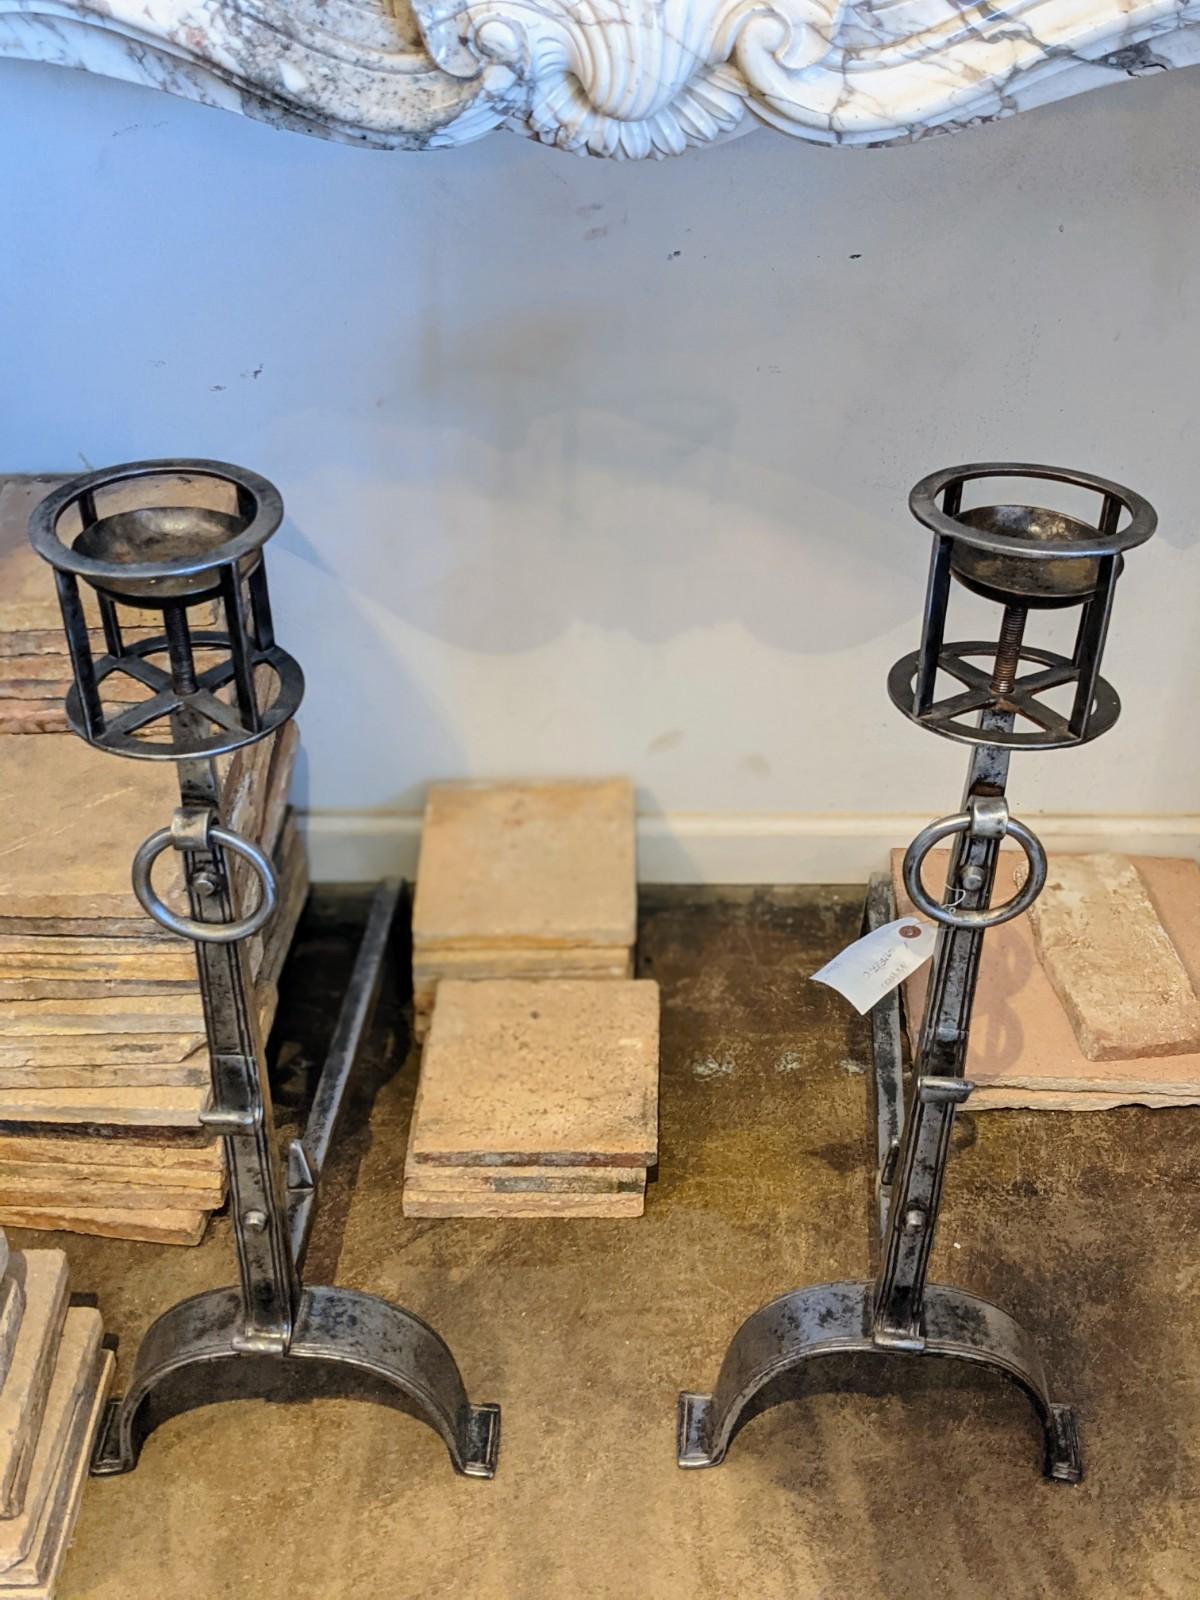 These each feature an adjustable vessel holder atop a tapering ringed standard, having lower and middle outset skewer hooks, ending with bifurcated arched feet. They have a recent polish for an extraordinary patina. These are probably of French